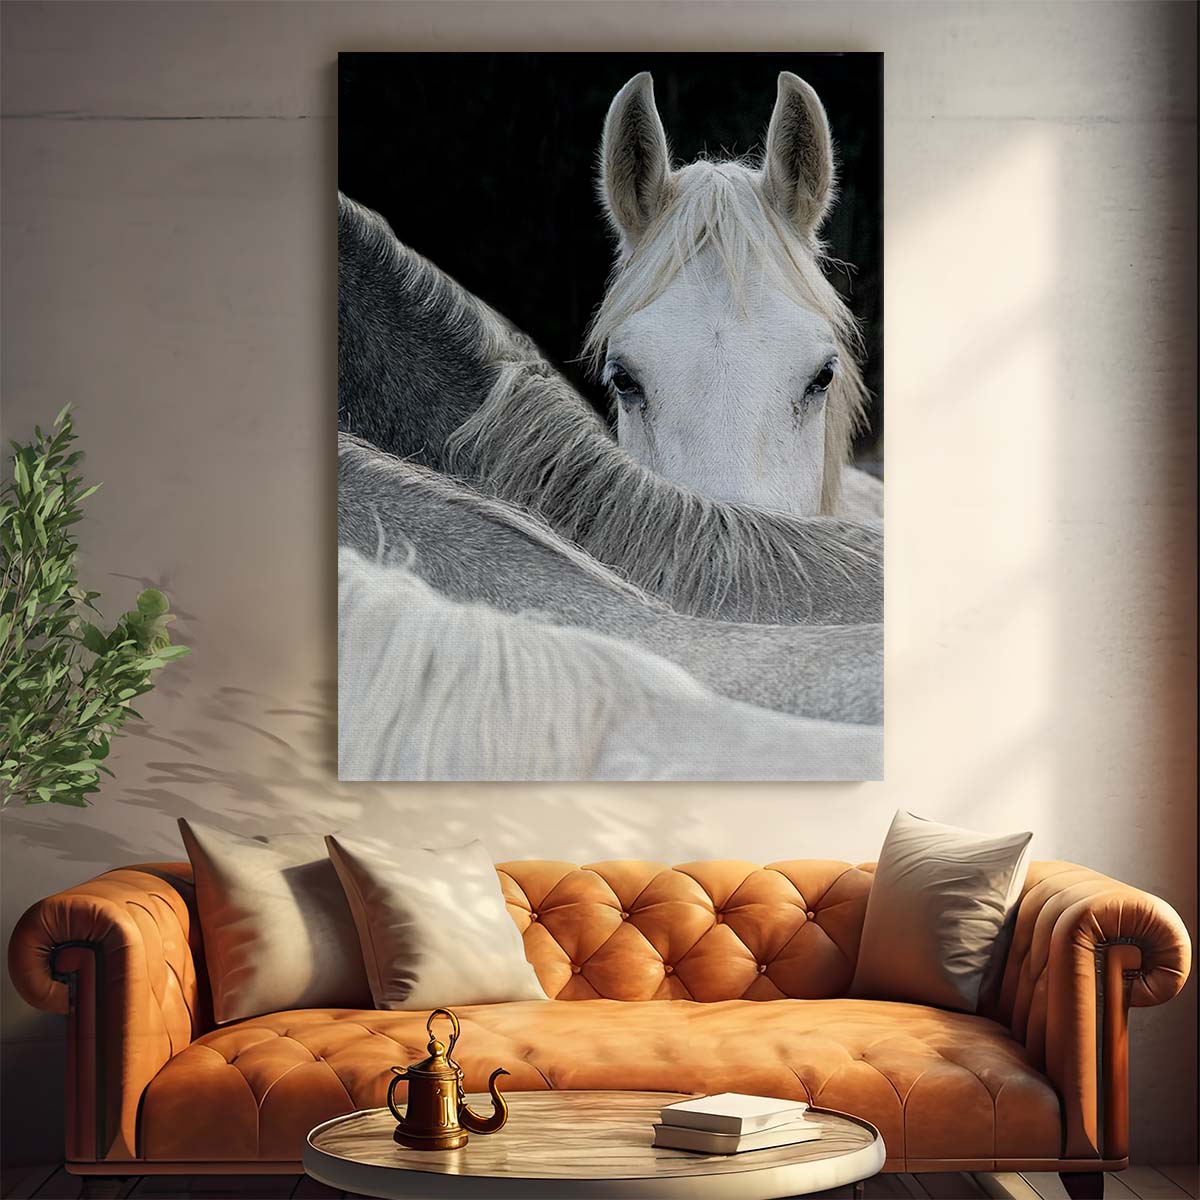 Abstract Equestrian Photography White Horses Watching by Milan Malovrh by Luxuriance Designs, made in USA